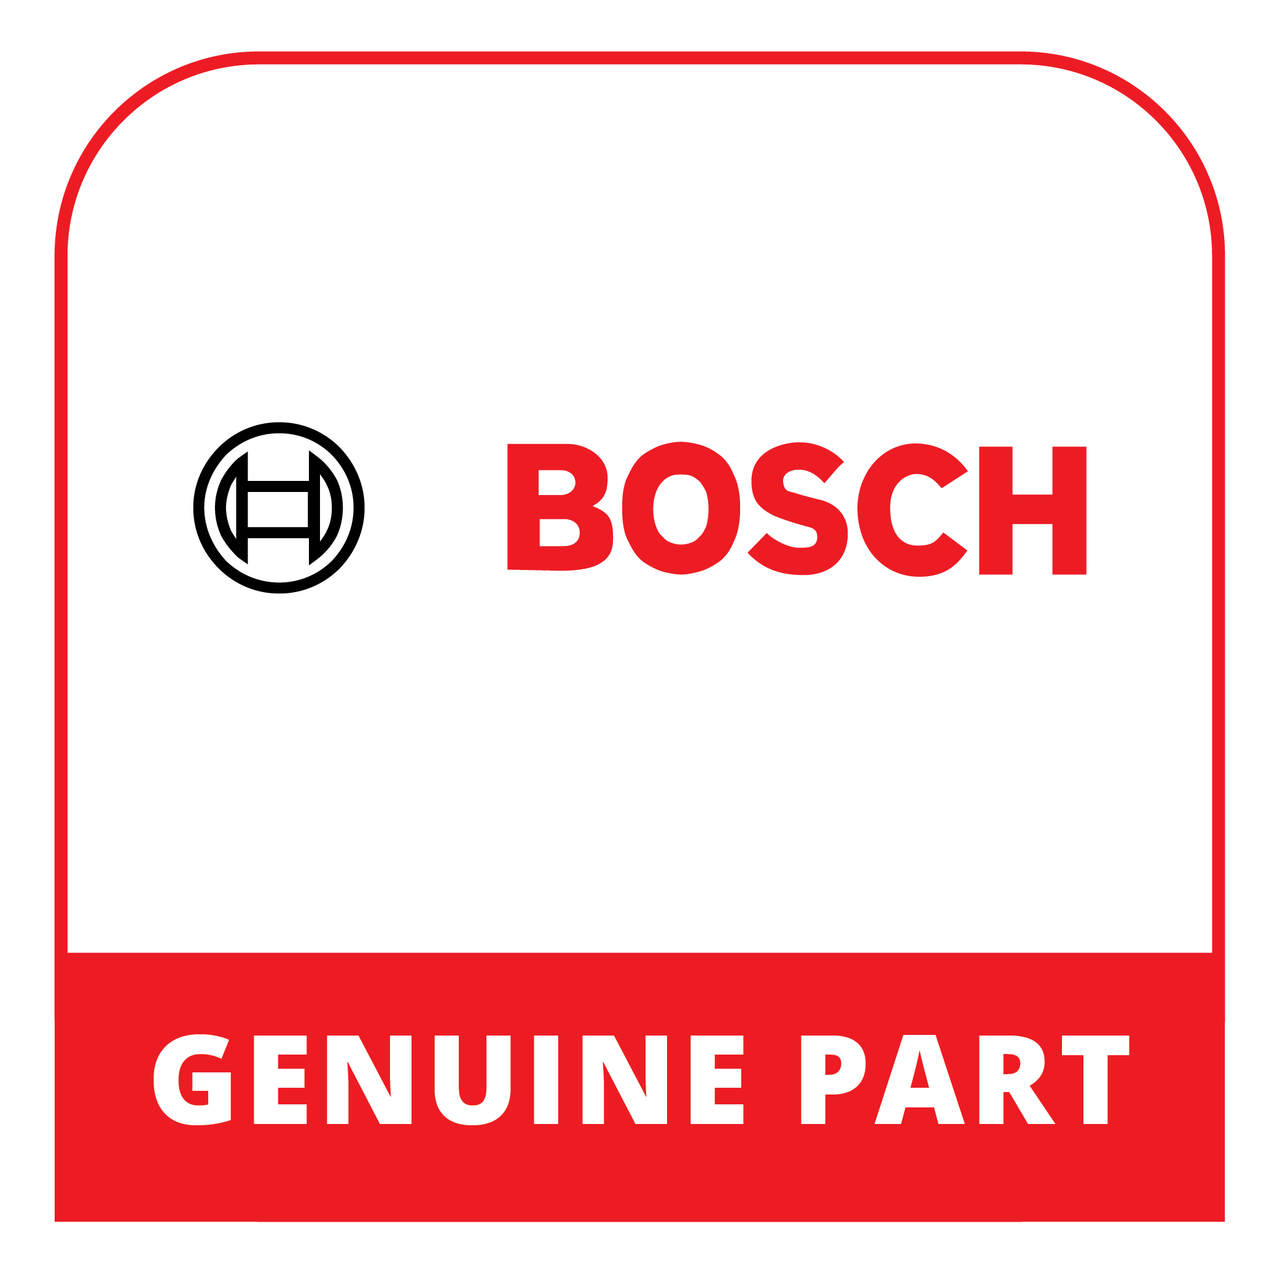 Bosch (Thermador) 11025339 - Cover Sheet - Genuine Bosch (Thermador) Part